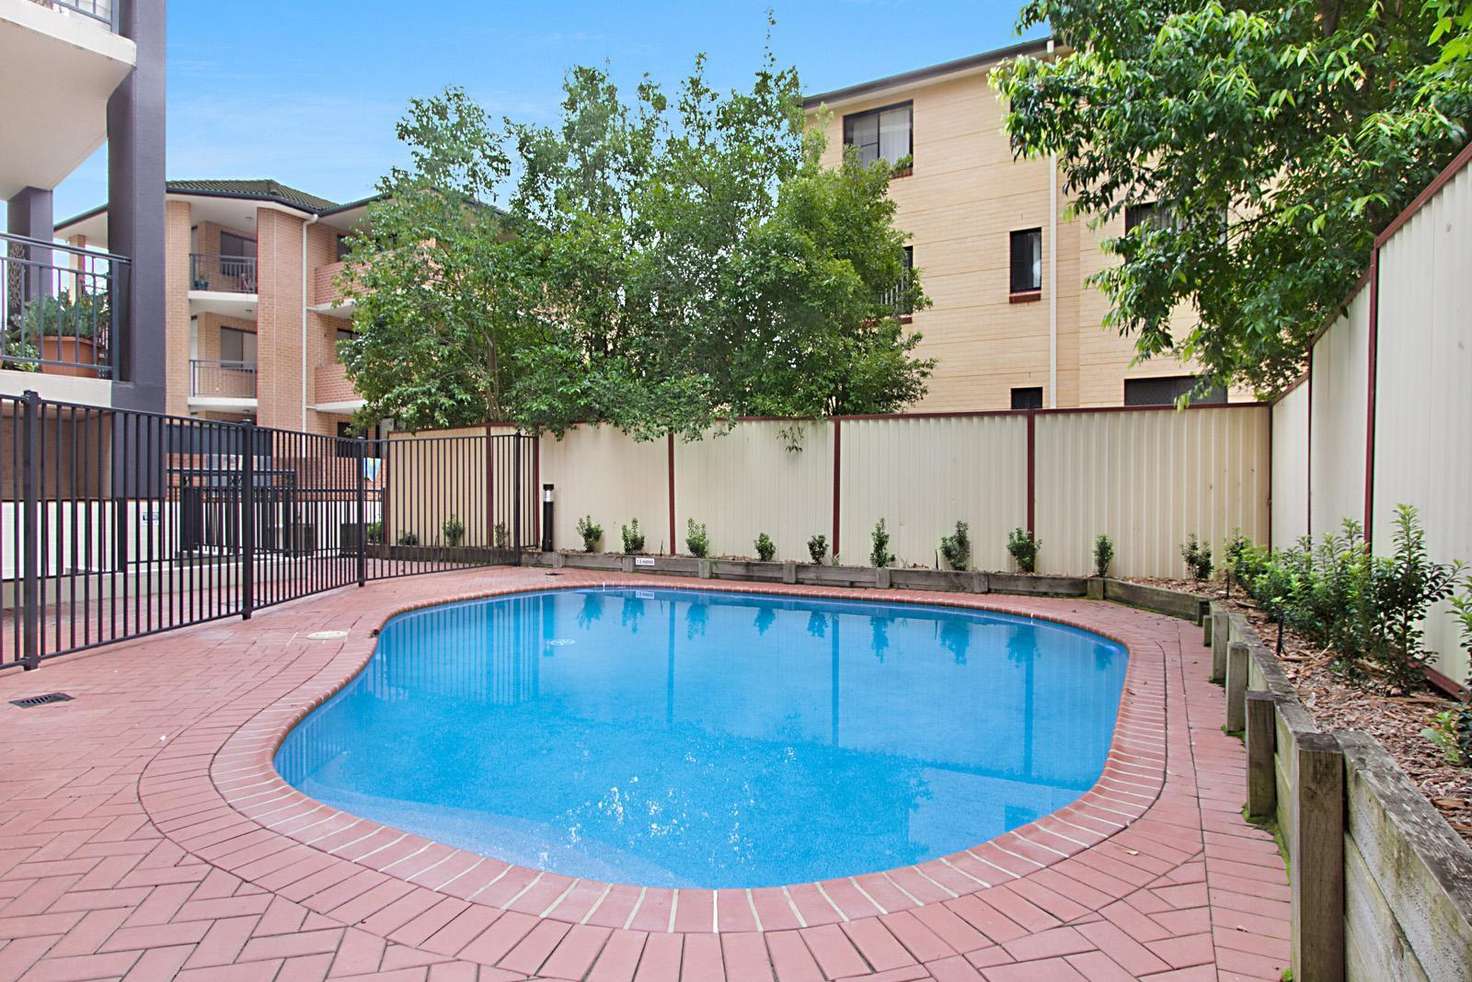 Main view of Homely apartment listing, 11/19 Good Street, Parramatta NSW 2150